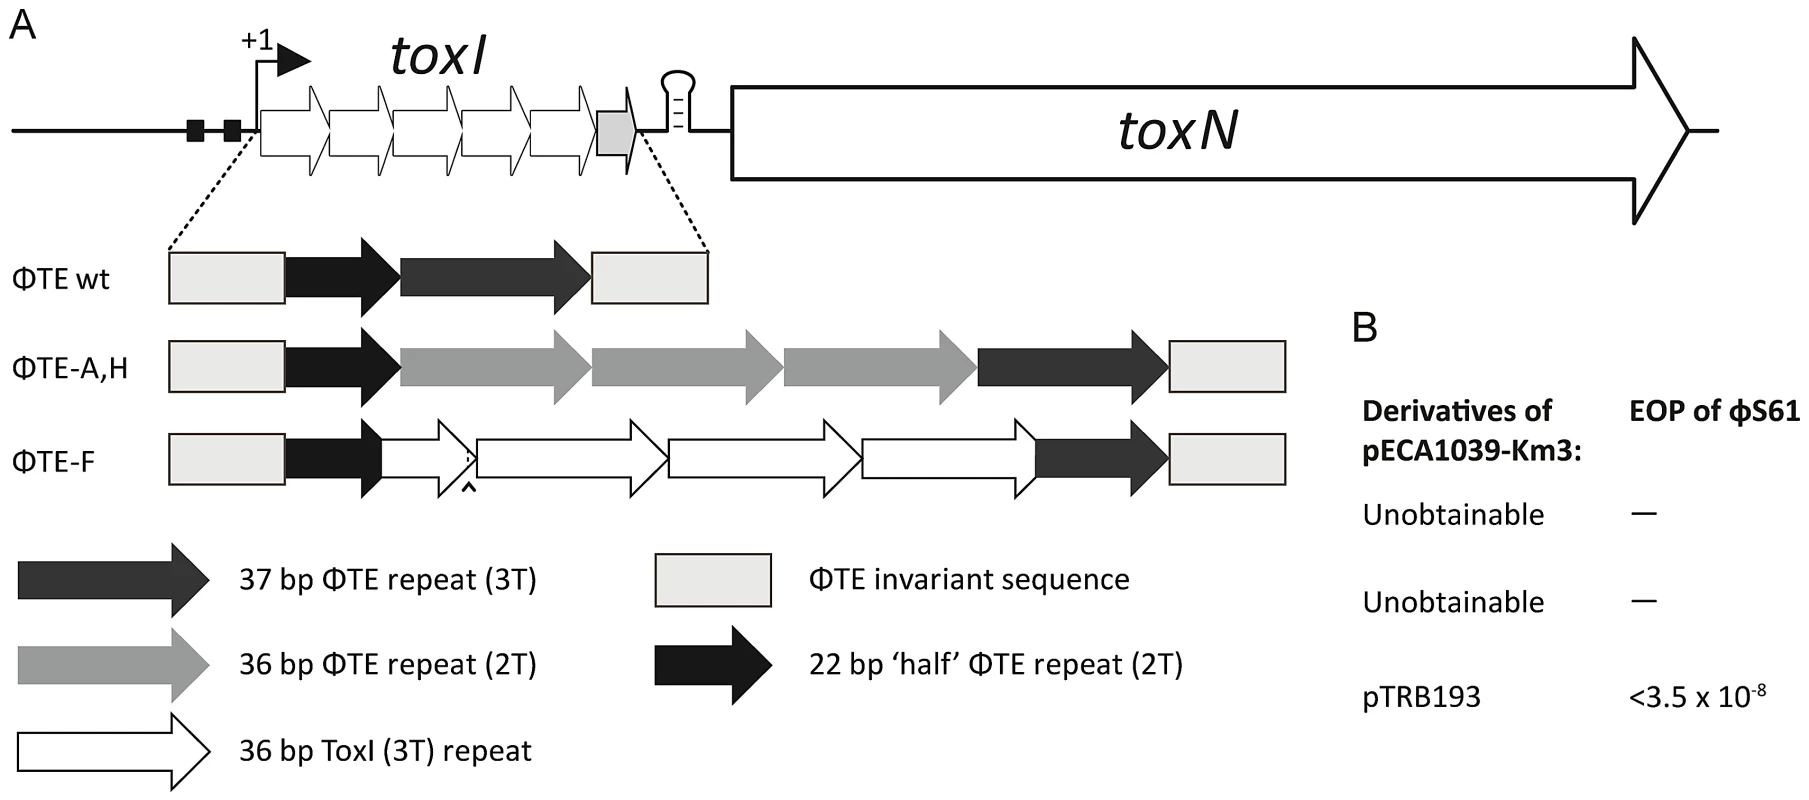 Only the recombinant ΦTE-F escape locus can replace ToxI in the native ToxIN locus.